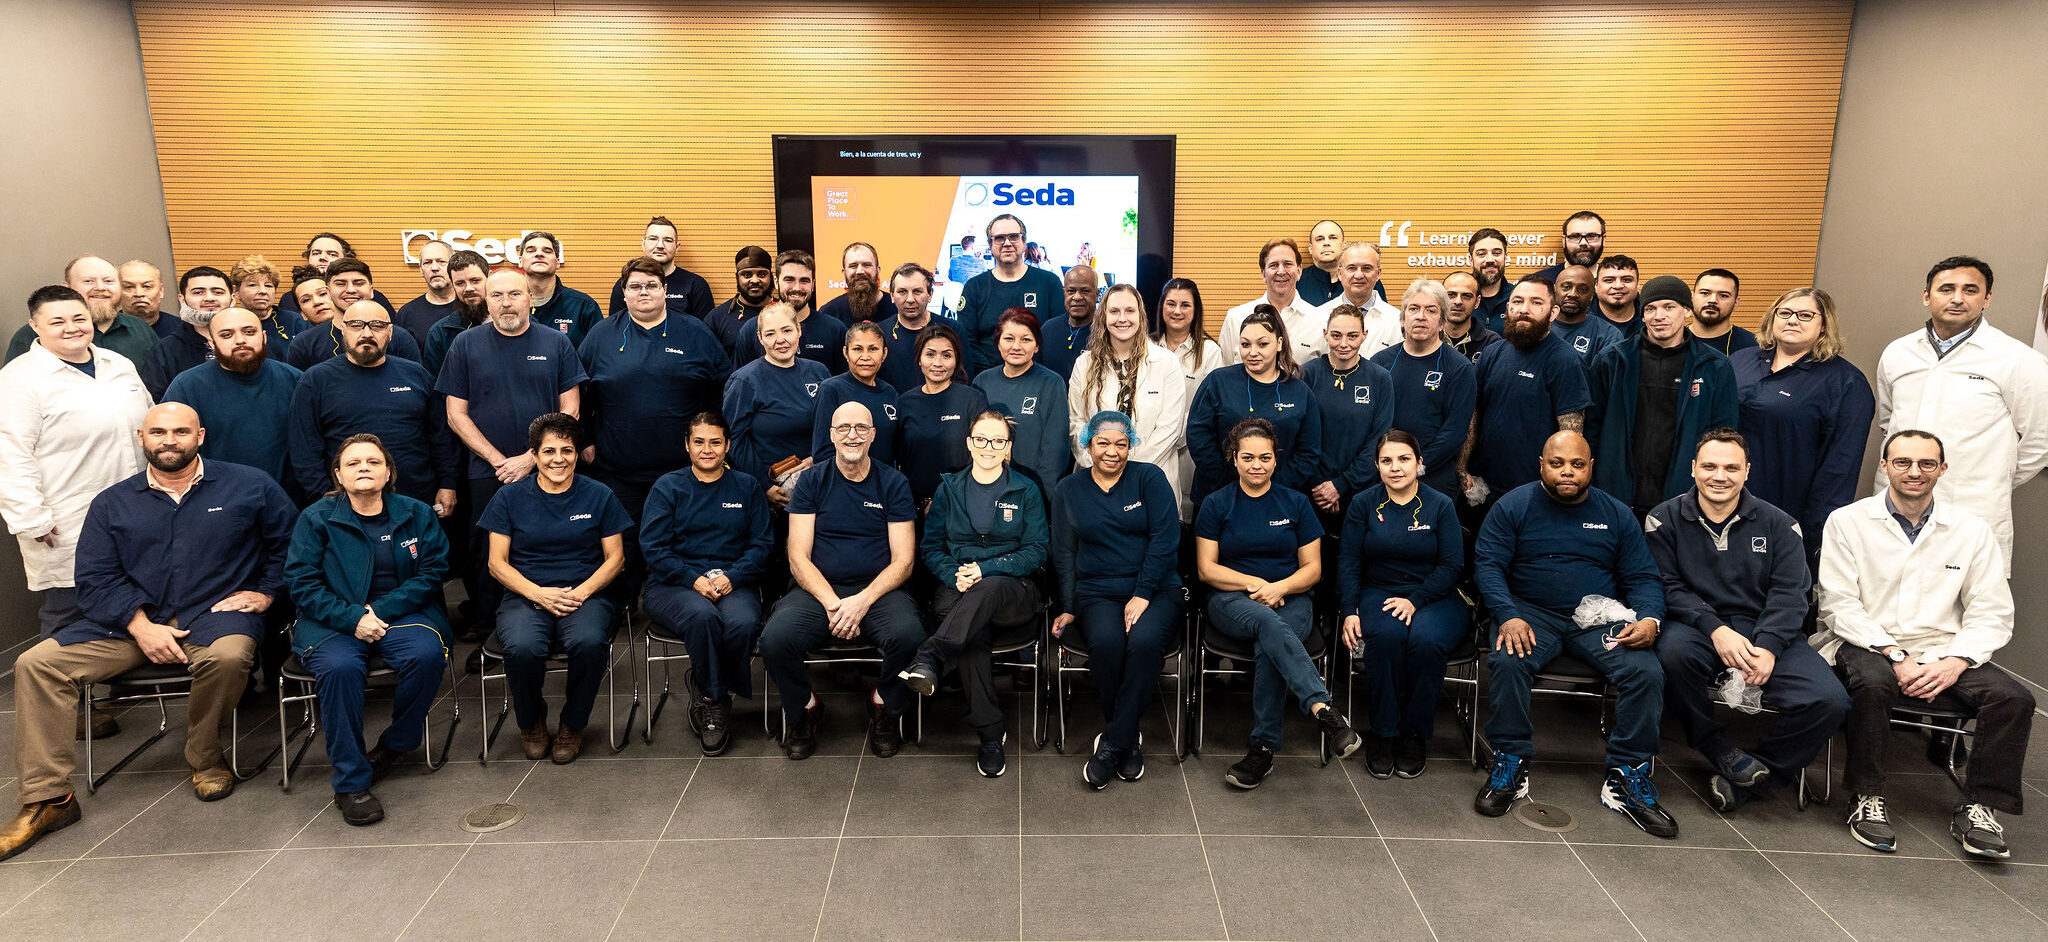 Seda North America recertified as great place to work